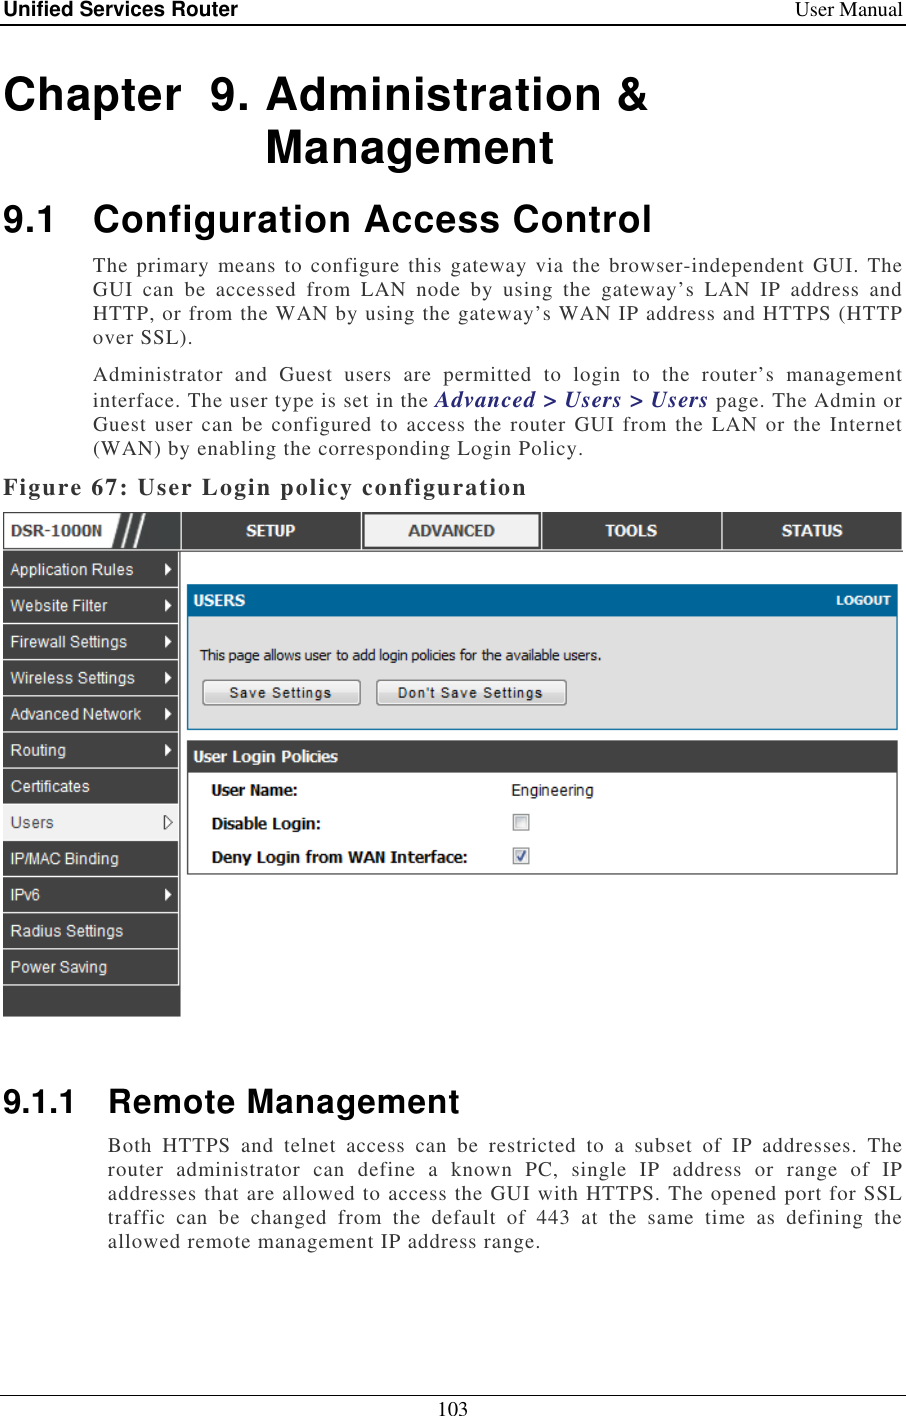 Unified Services Router    User Manual 103  Chapter  9. Administration &amp; Management 9.1  Configuration Access Control The  primary means to configure  this gateway  via the  browser-independent  GUI.  The GUI  can  be  accessed  from  LAN  node  by  using  the  gateway’s  LAN  IP  address  and HTTP, or from the WAN by using the gateway’s WAN IP address and HTTPS (HTTP over SSL).  Administrator  and  Guest  users  are  permitted  to  login  to  the  router’s  management interface. The user type is set in the Advanced &gt; Users &gt; Users page. The Admin or Guest  user can  be configured to access the  router  GUI from the LAN or the Internet (WAN) by enabling the corresponding Login Policy.  Figure 67: User Login policy configuration   9.1.1  Remote Management Both  HTTPS  and  telnet  access  can  be  restricted  to  a  subset  of  IP  addresses.  The router  administrator  can  define  a  known  PC,  single  IP  address  or  range  of  IP addresses that are allowed to access the GUI with HTTPS. The opened port for SSL traffic  can  be  changed  from  the  default  of  443  at  the  same  time  as  defining  the allowed remote management IP address range.  